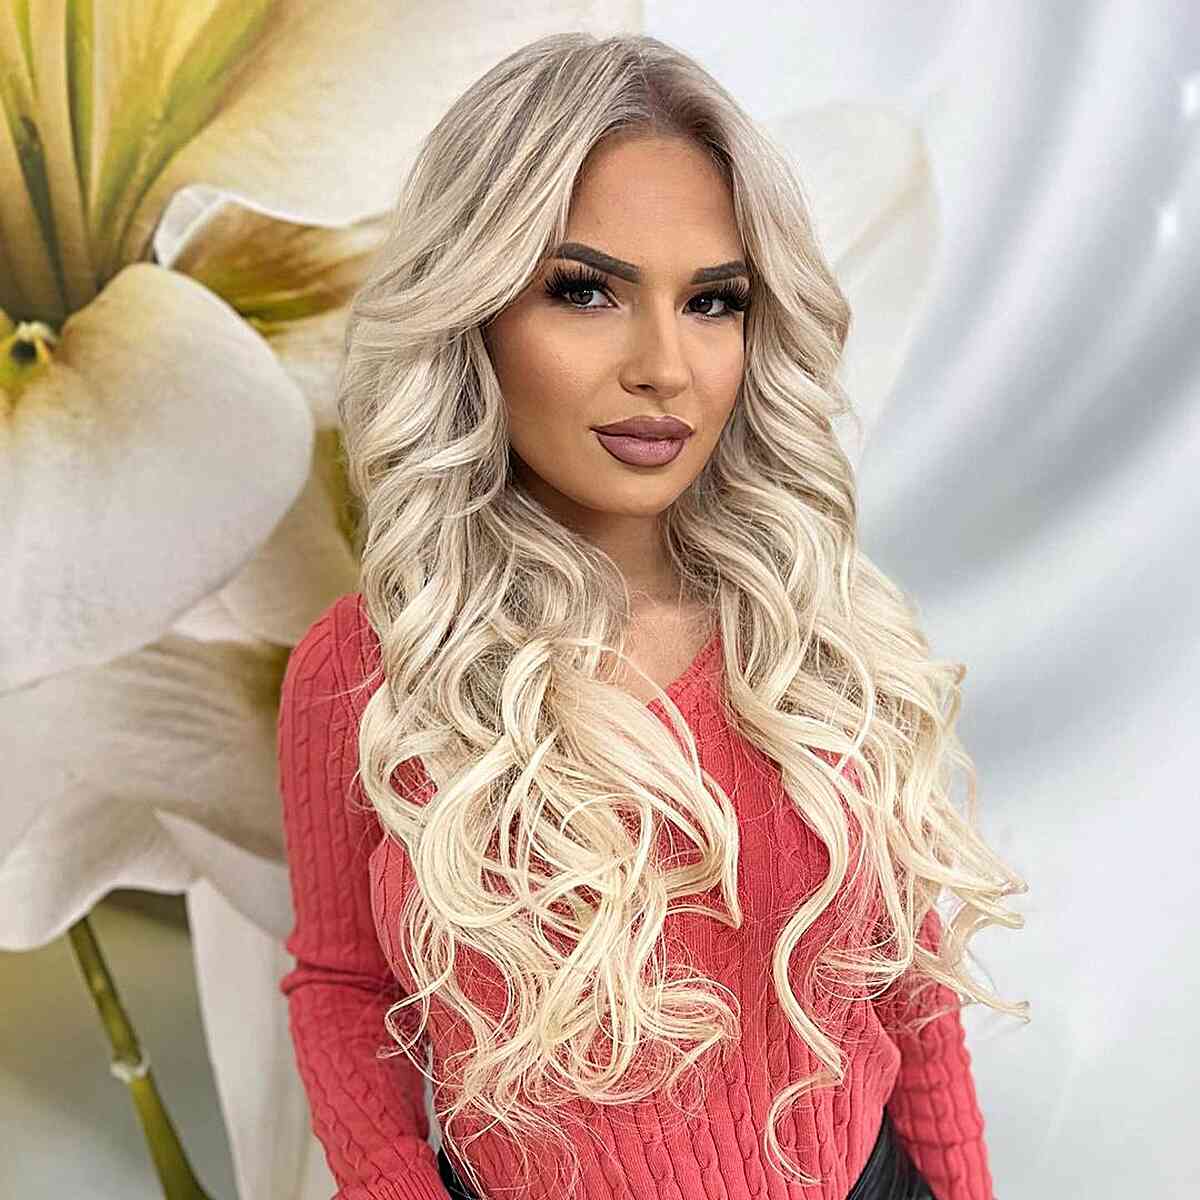 Jaw-Dropping White Blonde Long Hair with curled ends and a center part